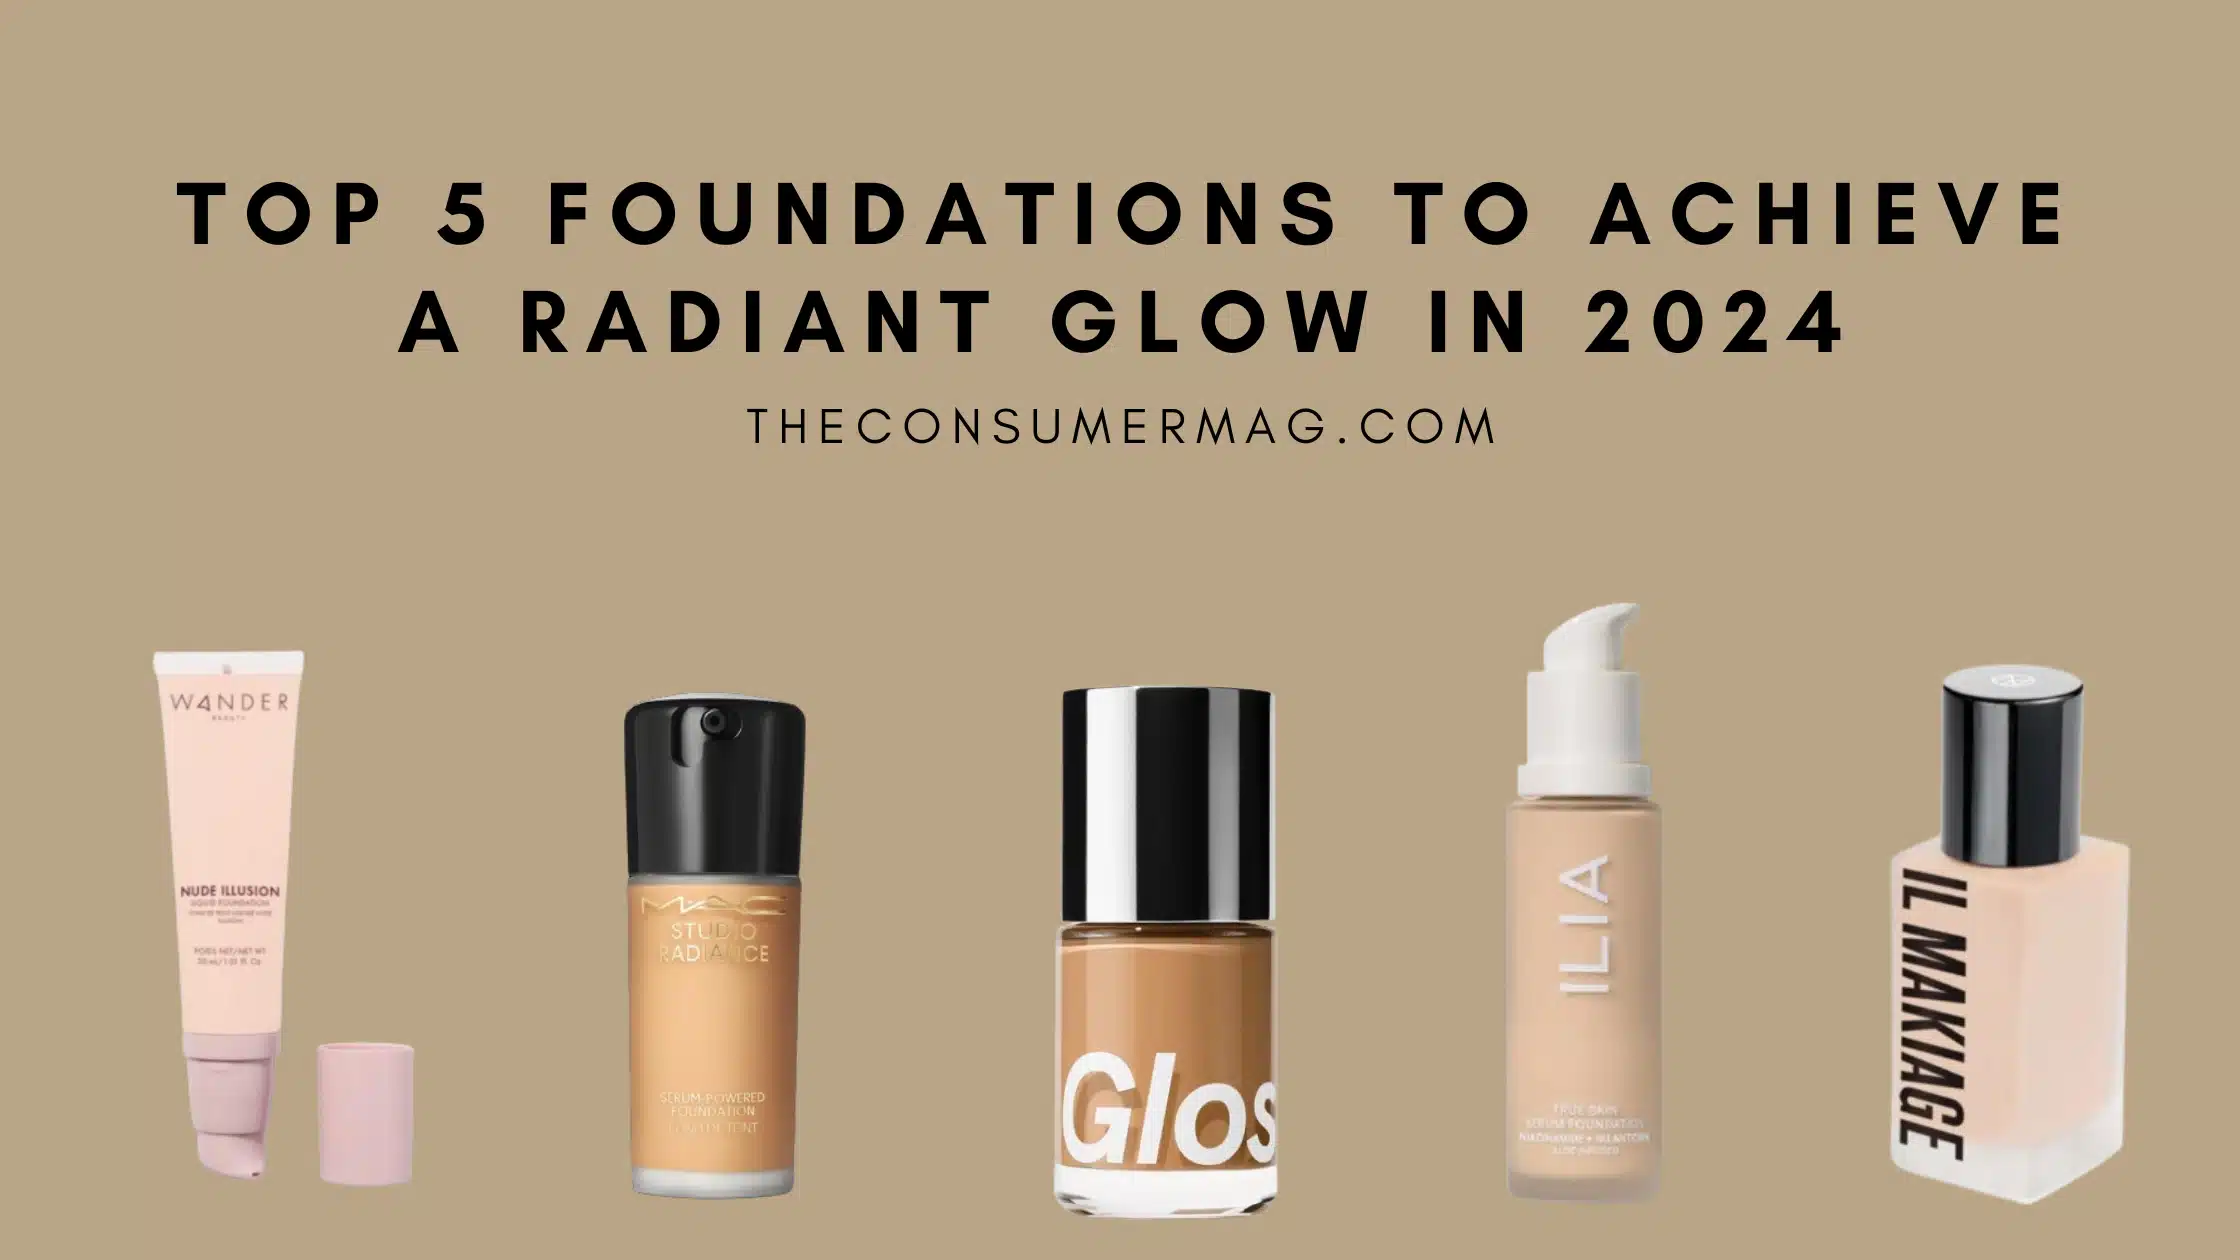 Top 5 Foundations to Achieve a Radiant Glow in 2024